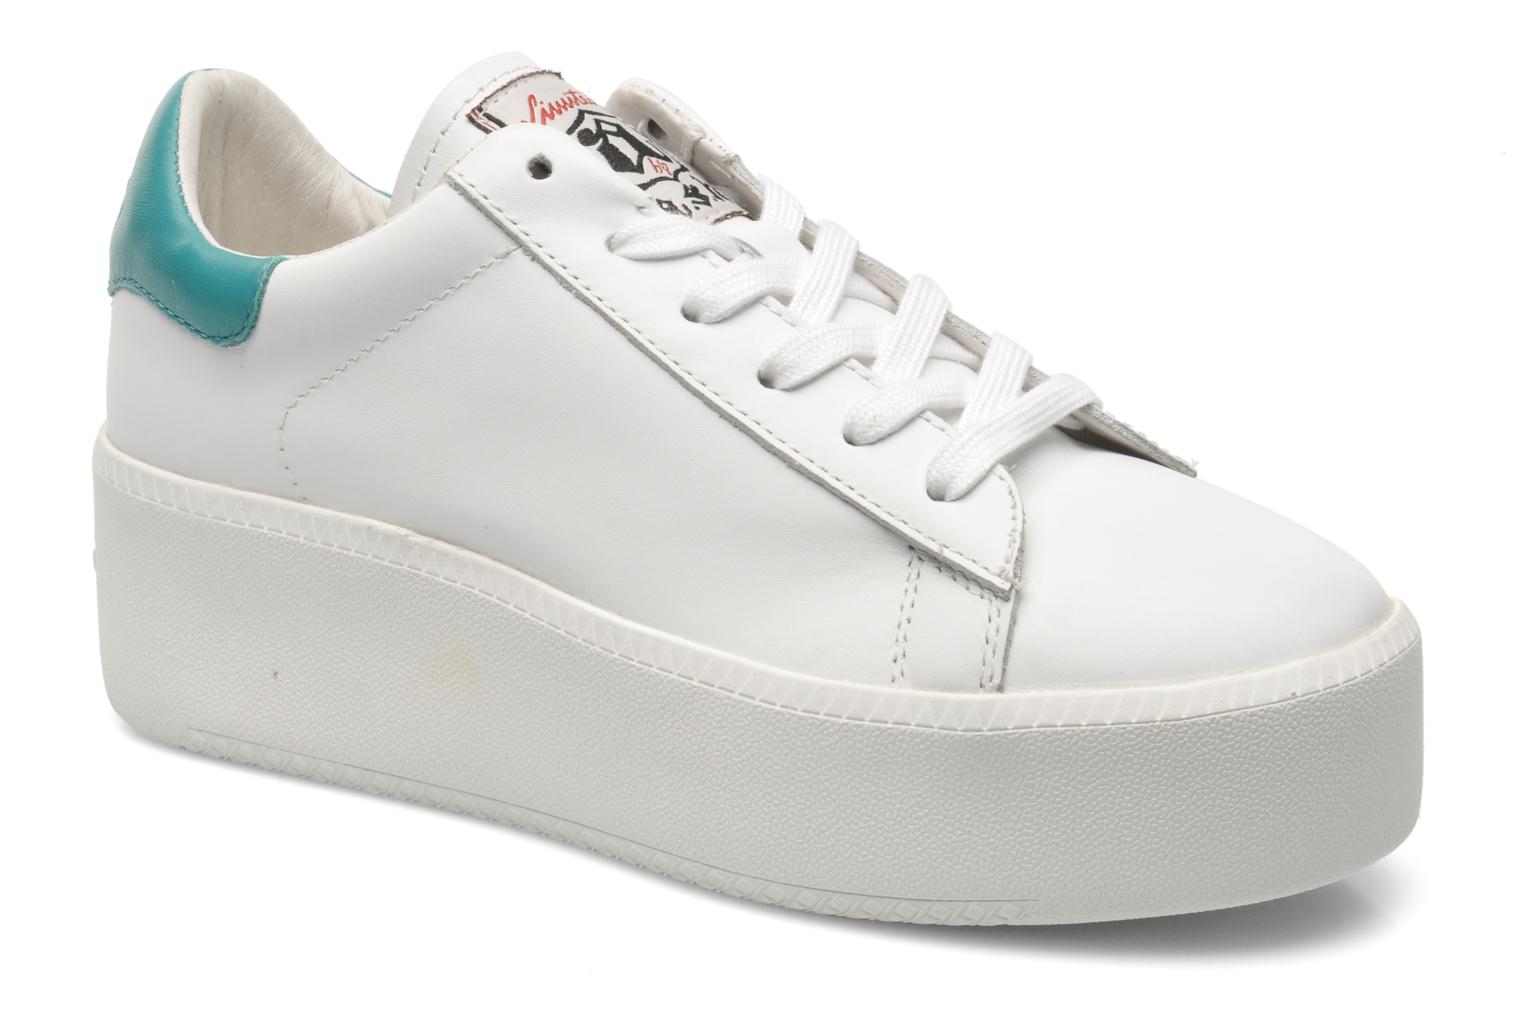 Ash Cult Trainers in White at Sarenza (208433)